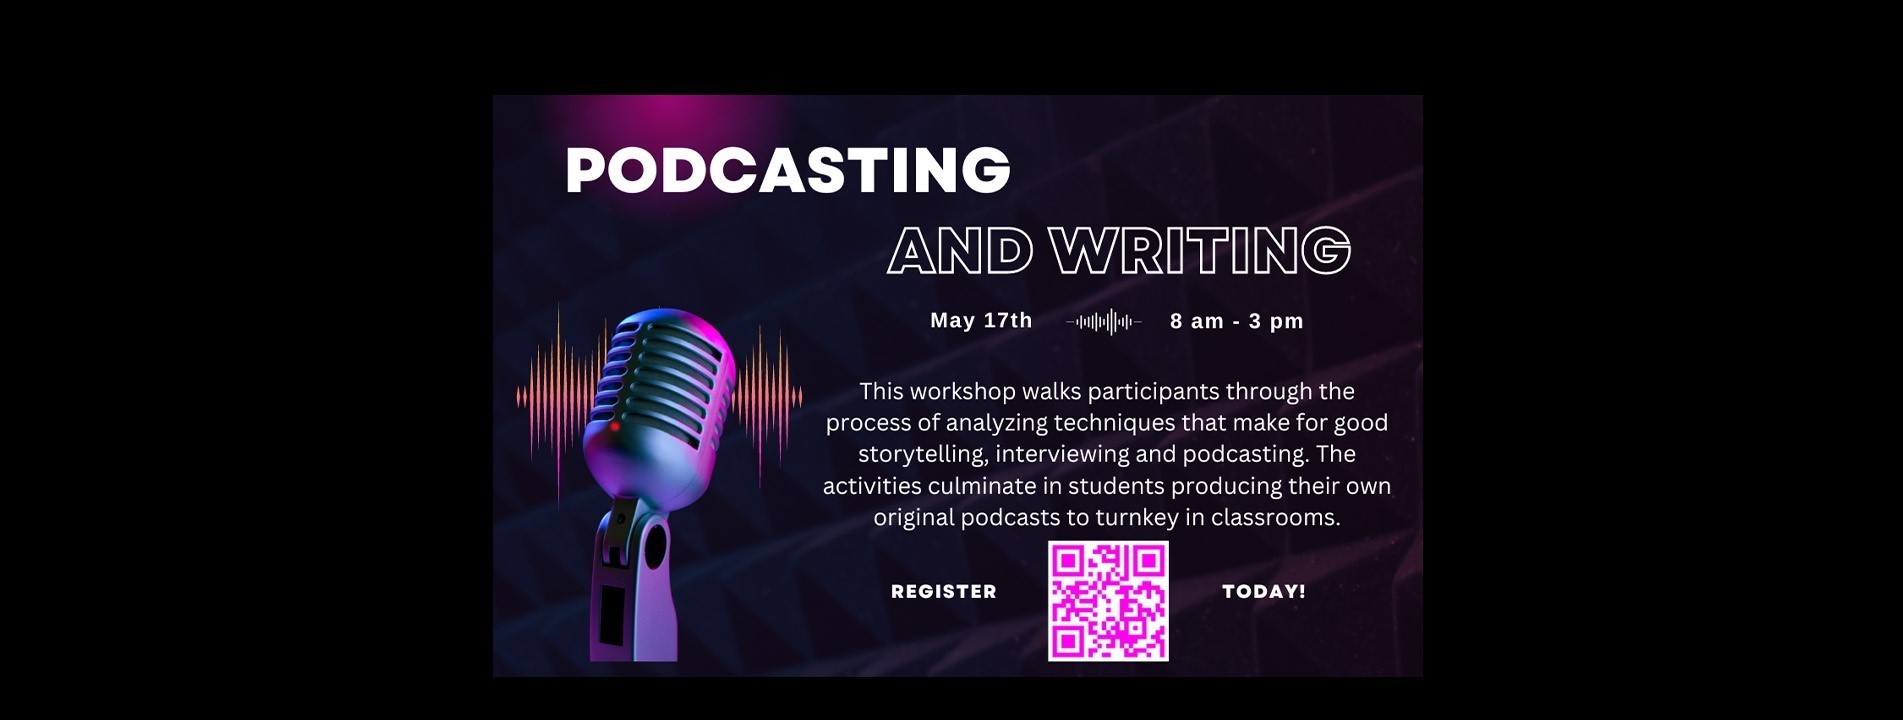 Podcasting & Writing, May 17, 2023 from 8 am - 3 pm. Overview: This workshop walks participants through the process of analyzing techniques that make for good storytelling, interviewing and podcasting. The activities culminate in students producing their own original podcasts to turnkey in classrooms.